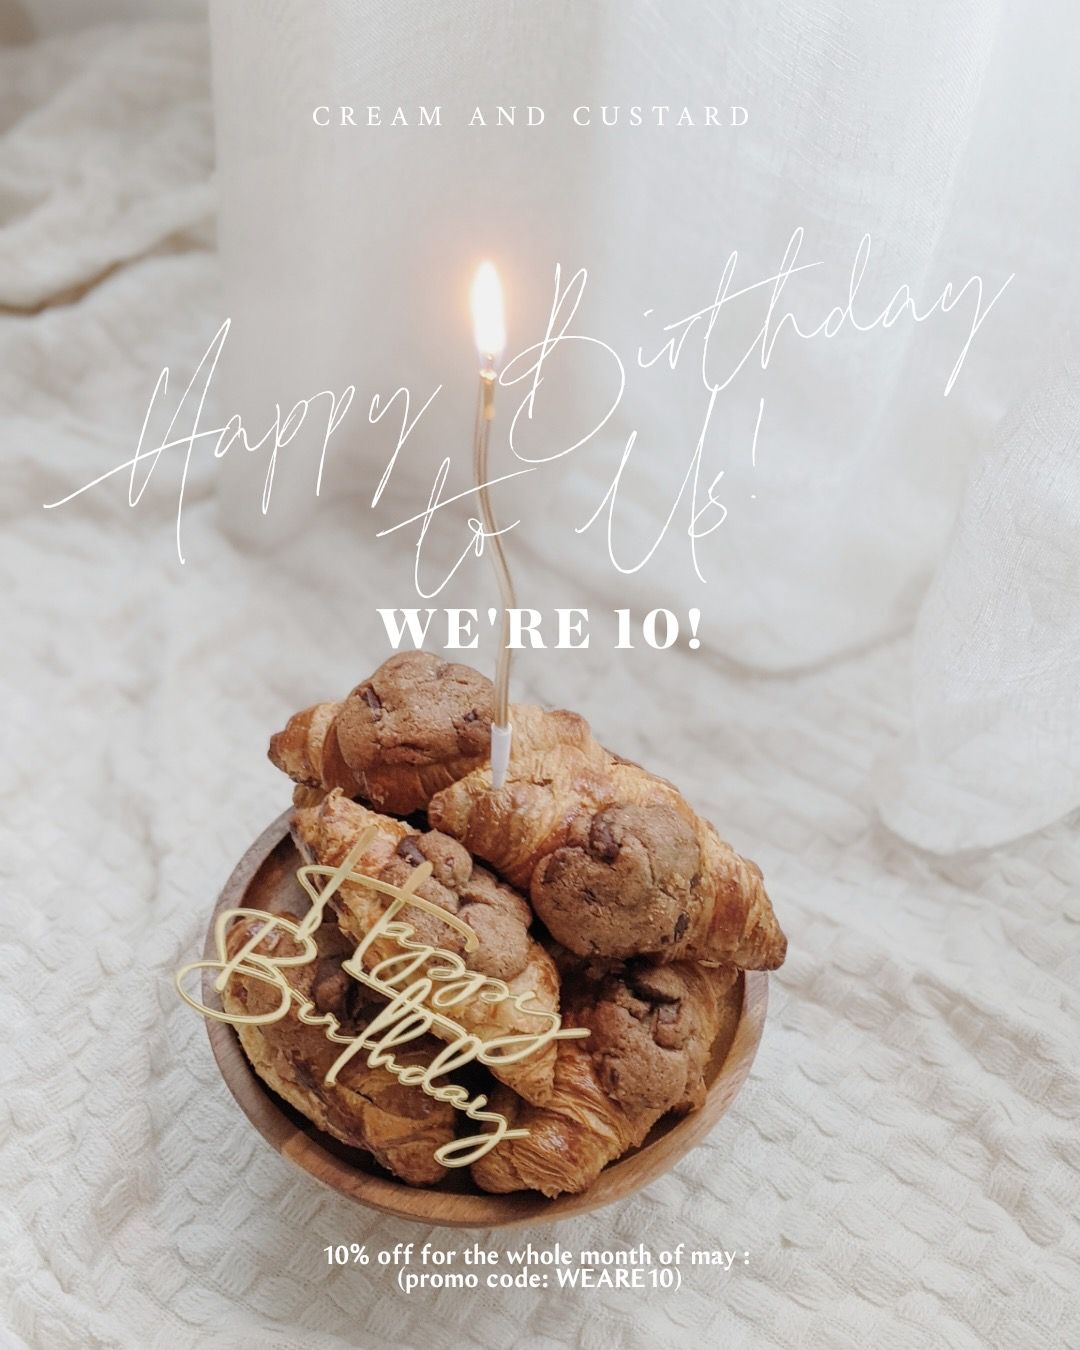 Celebrate our 10th birthday with our new loyalty program! Starting this May onwards, first-time customers get 10% off any cake purchase (promo code : “HELLO10”), while our regulars receive a free 500g cake of their choice (up to $57 value) with every 5 orders purchased with us (A minimum spend of $50 per order applies) Join the celebration and enjoy sweet rewards! *Promo code applies.